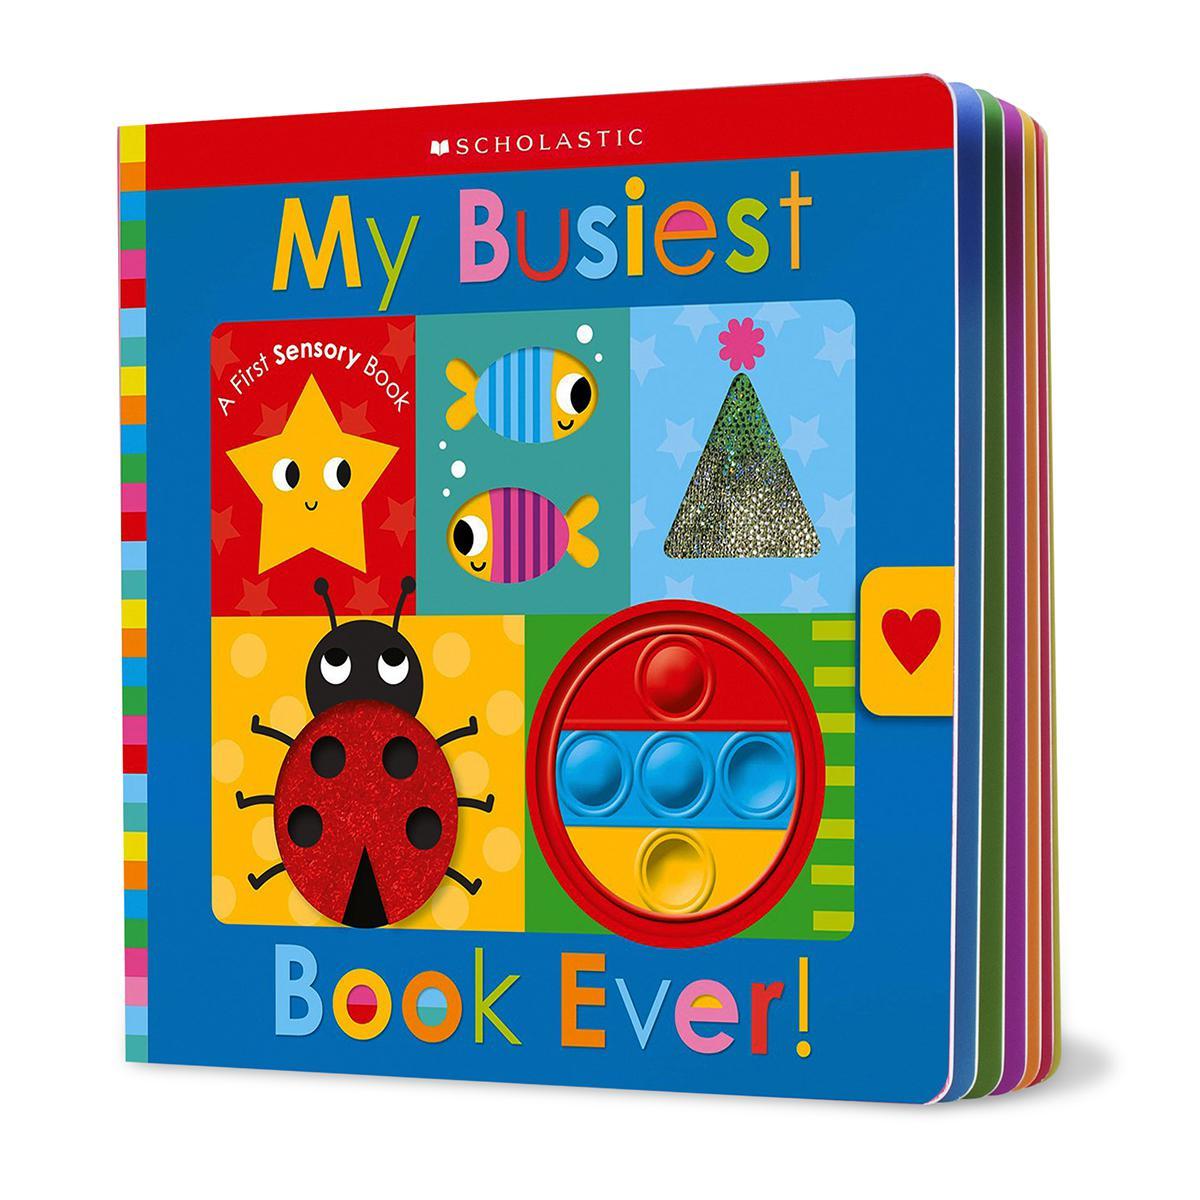  My Busiest Book Ever!: Scholastic Early Learners 